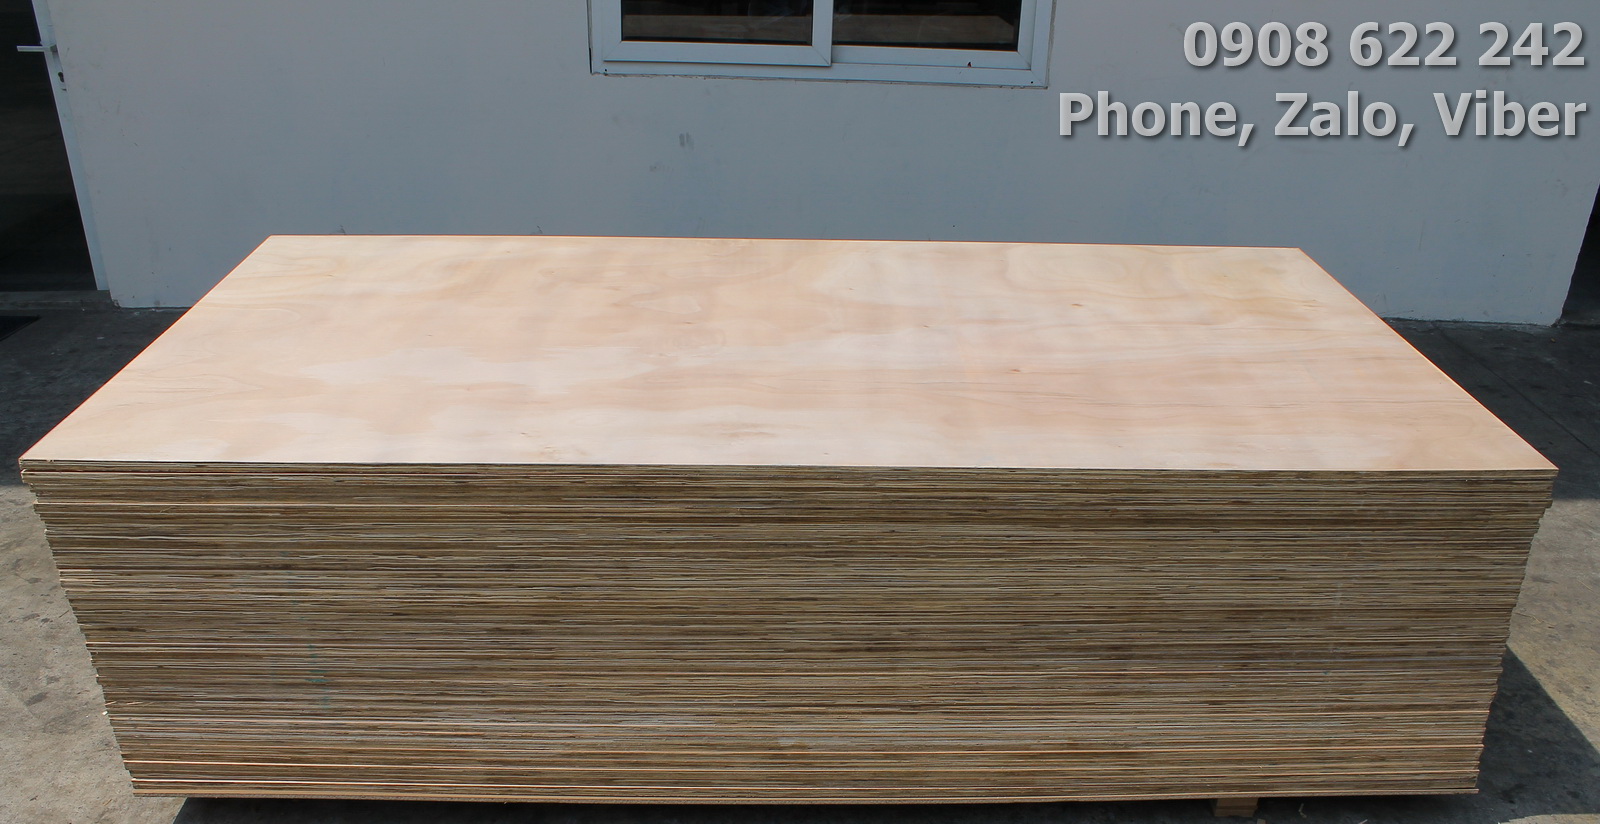 MOISURE RESISTANT PLYWOOD